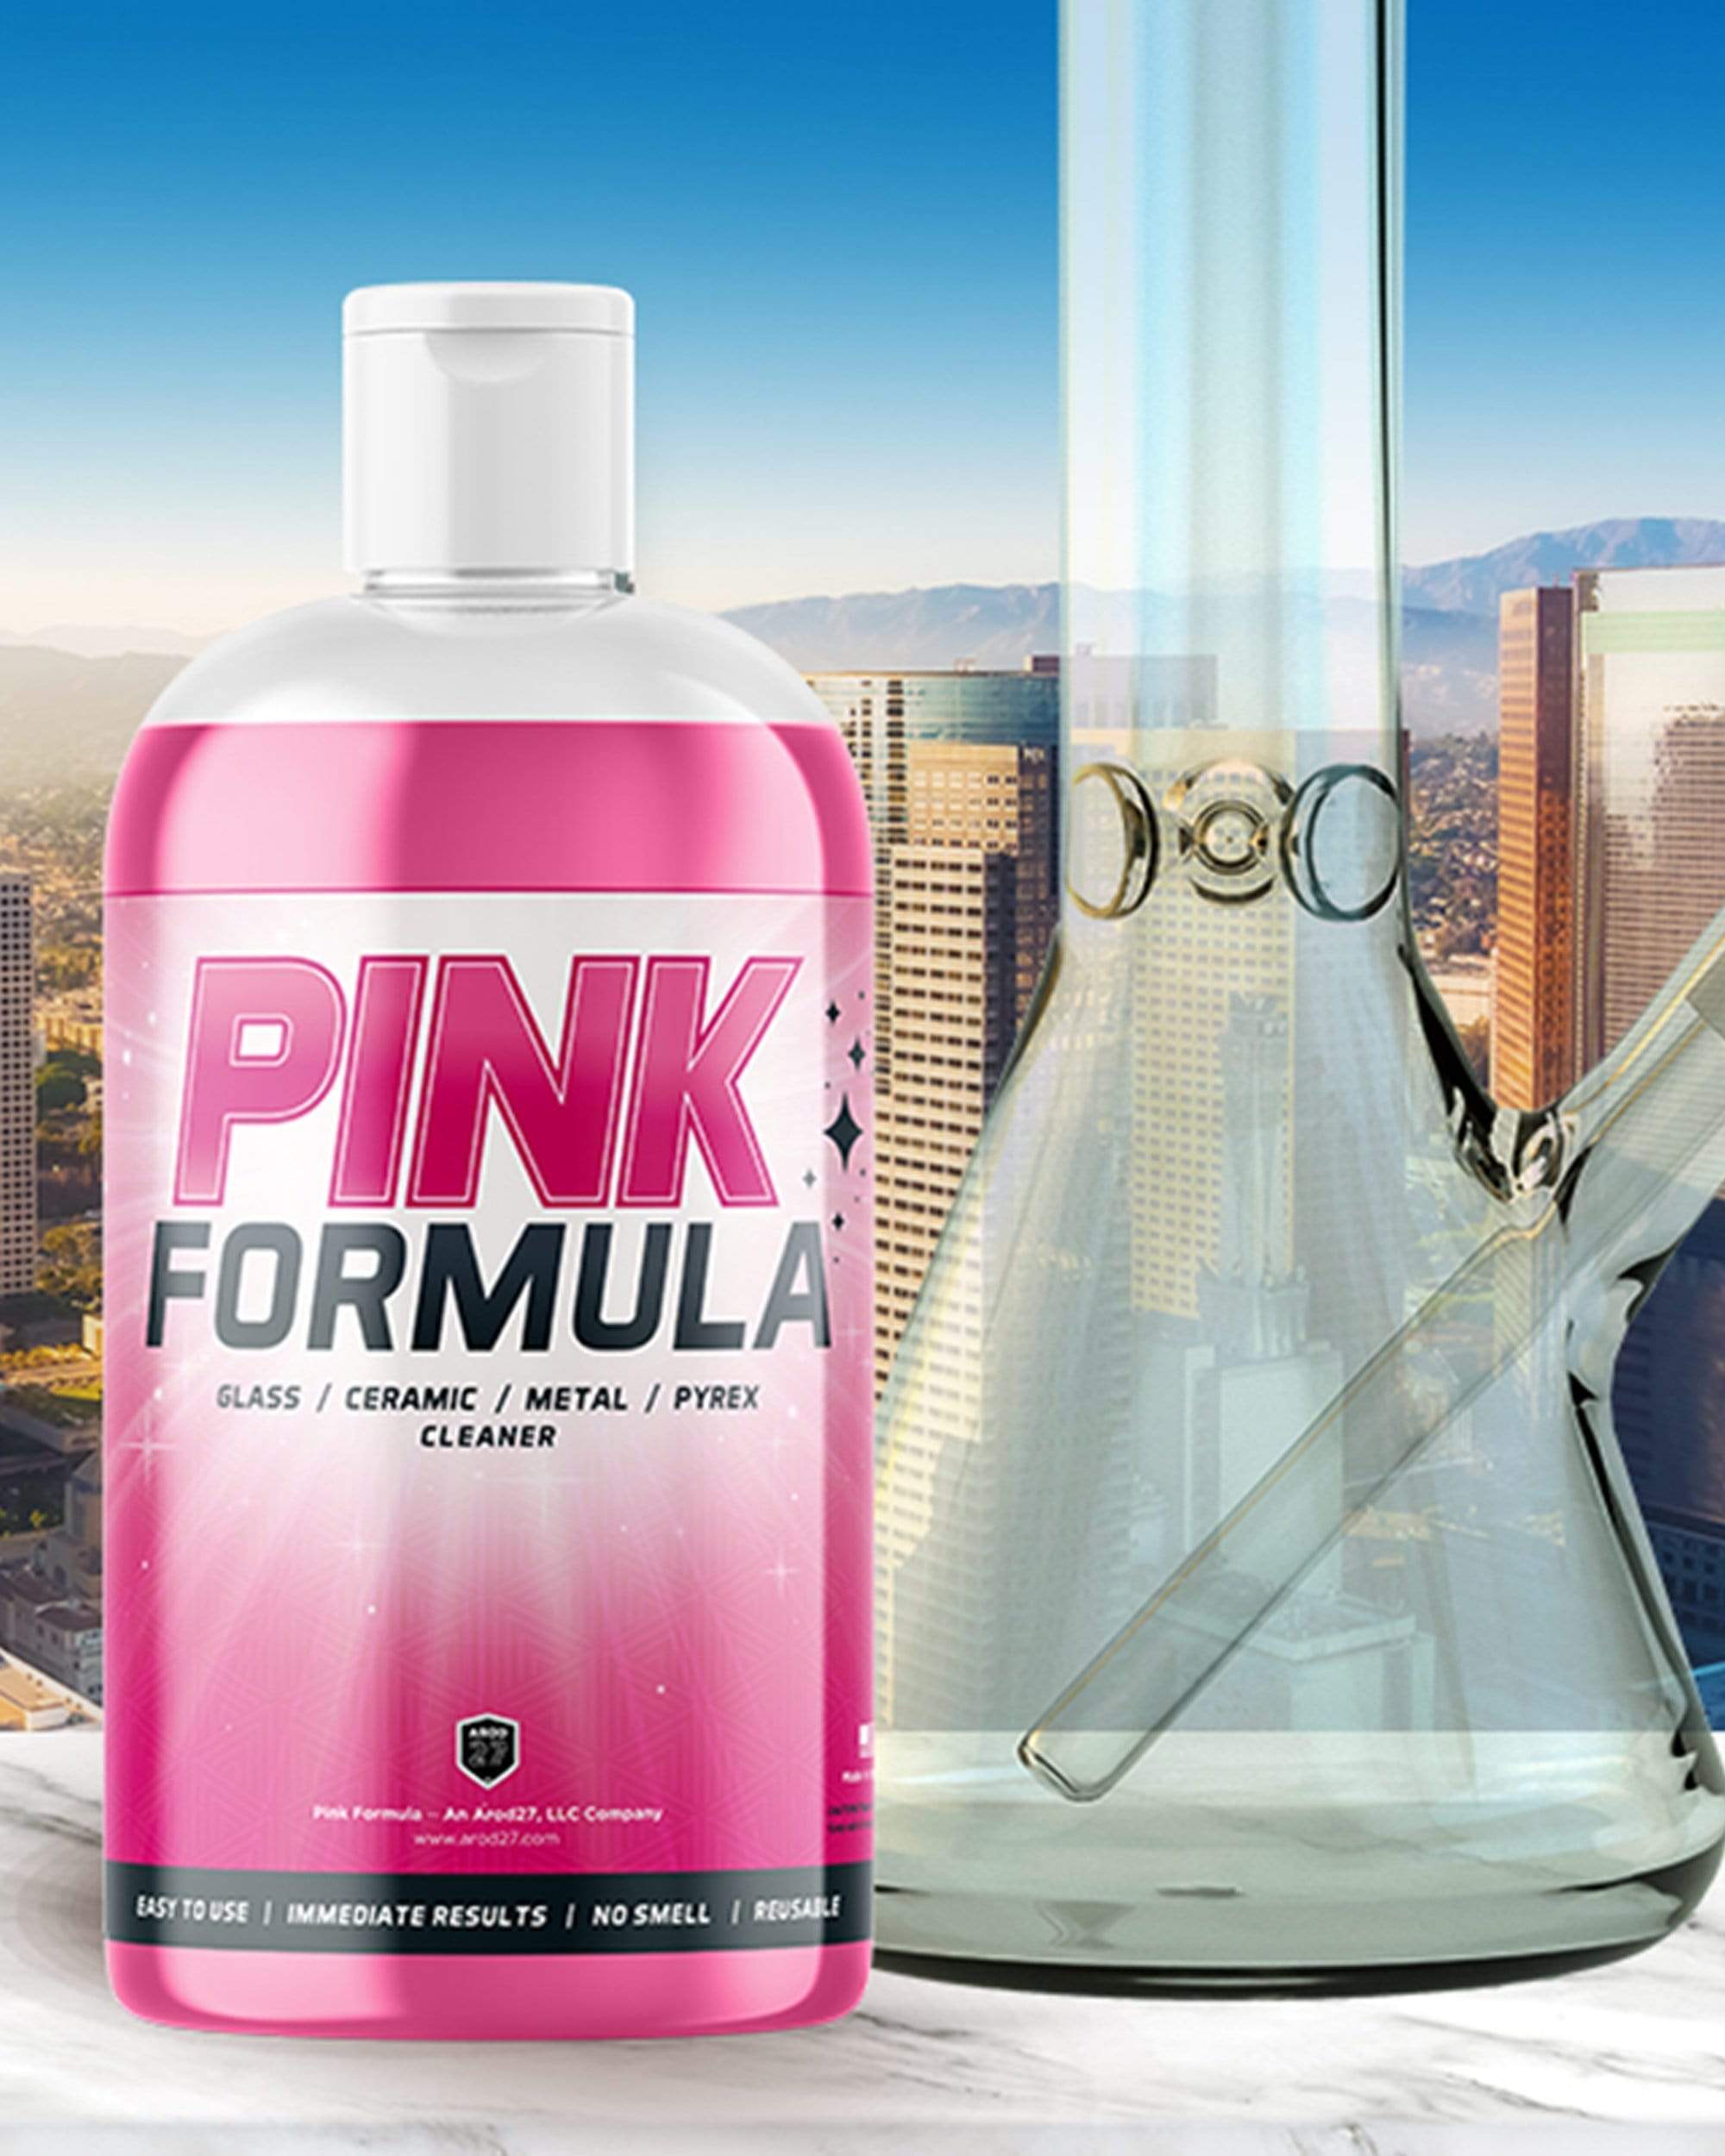 Pink Formula + Abrasive 𝟒𝟐𝟎 & 710 𝐖𝐚𝐭𝐞𝐫 Pipes Cleaner - Bubble Gum  Scented Strong Cleaning Solution for Glass, Ceramic, & Metal Surfaces -  Pipe Cleaner with Himalayan Salt (16 Fl Oz) 3 pack - Yahoo Shopping